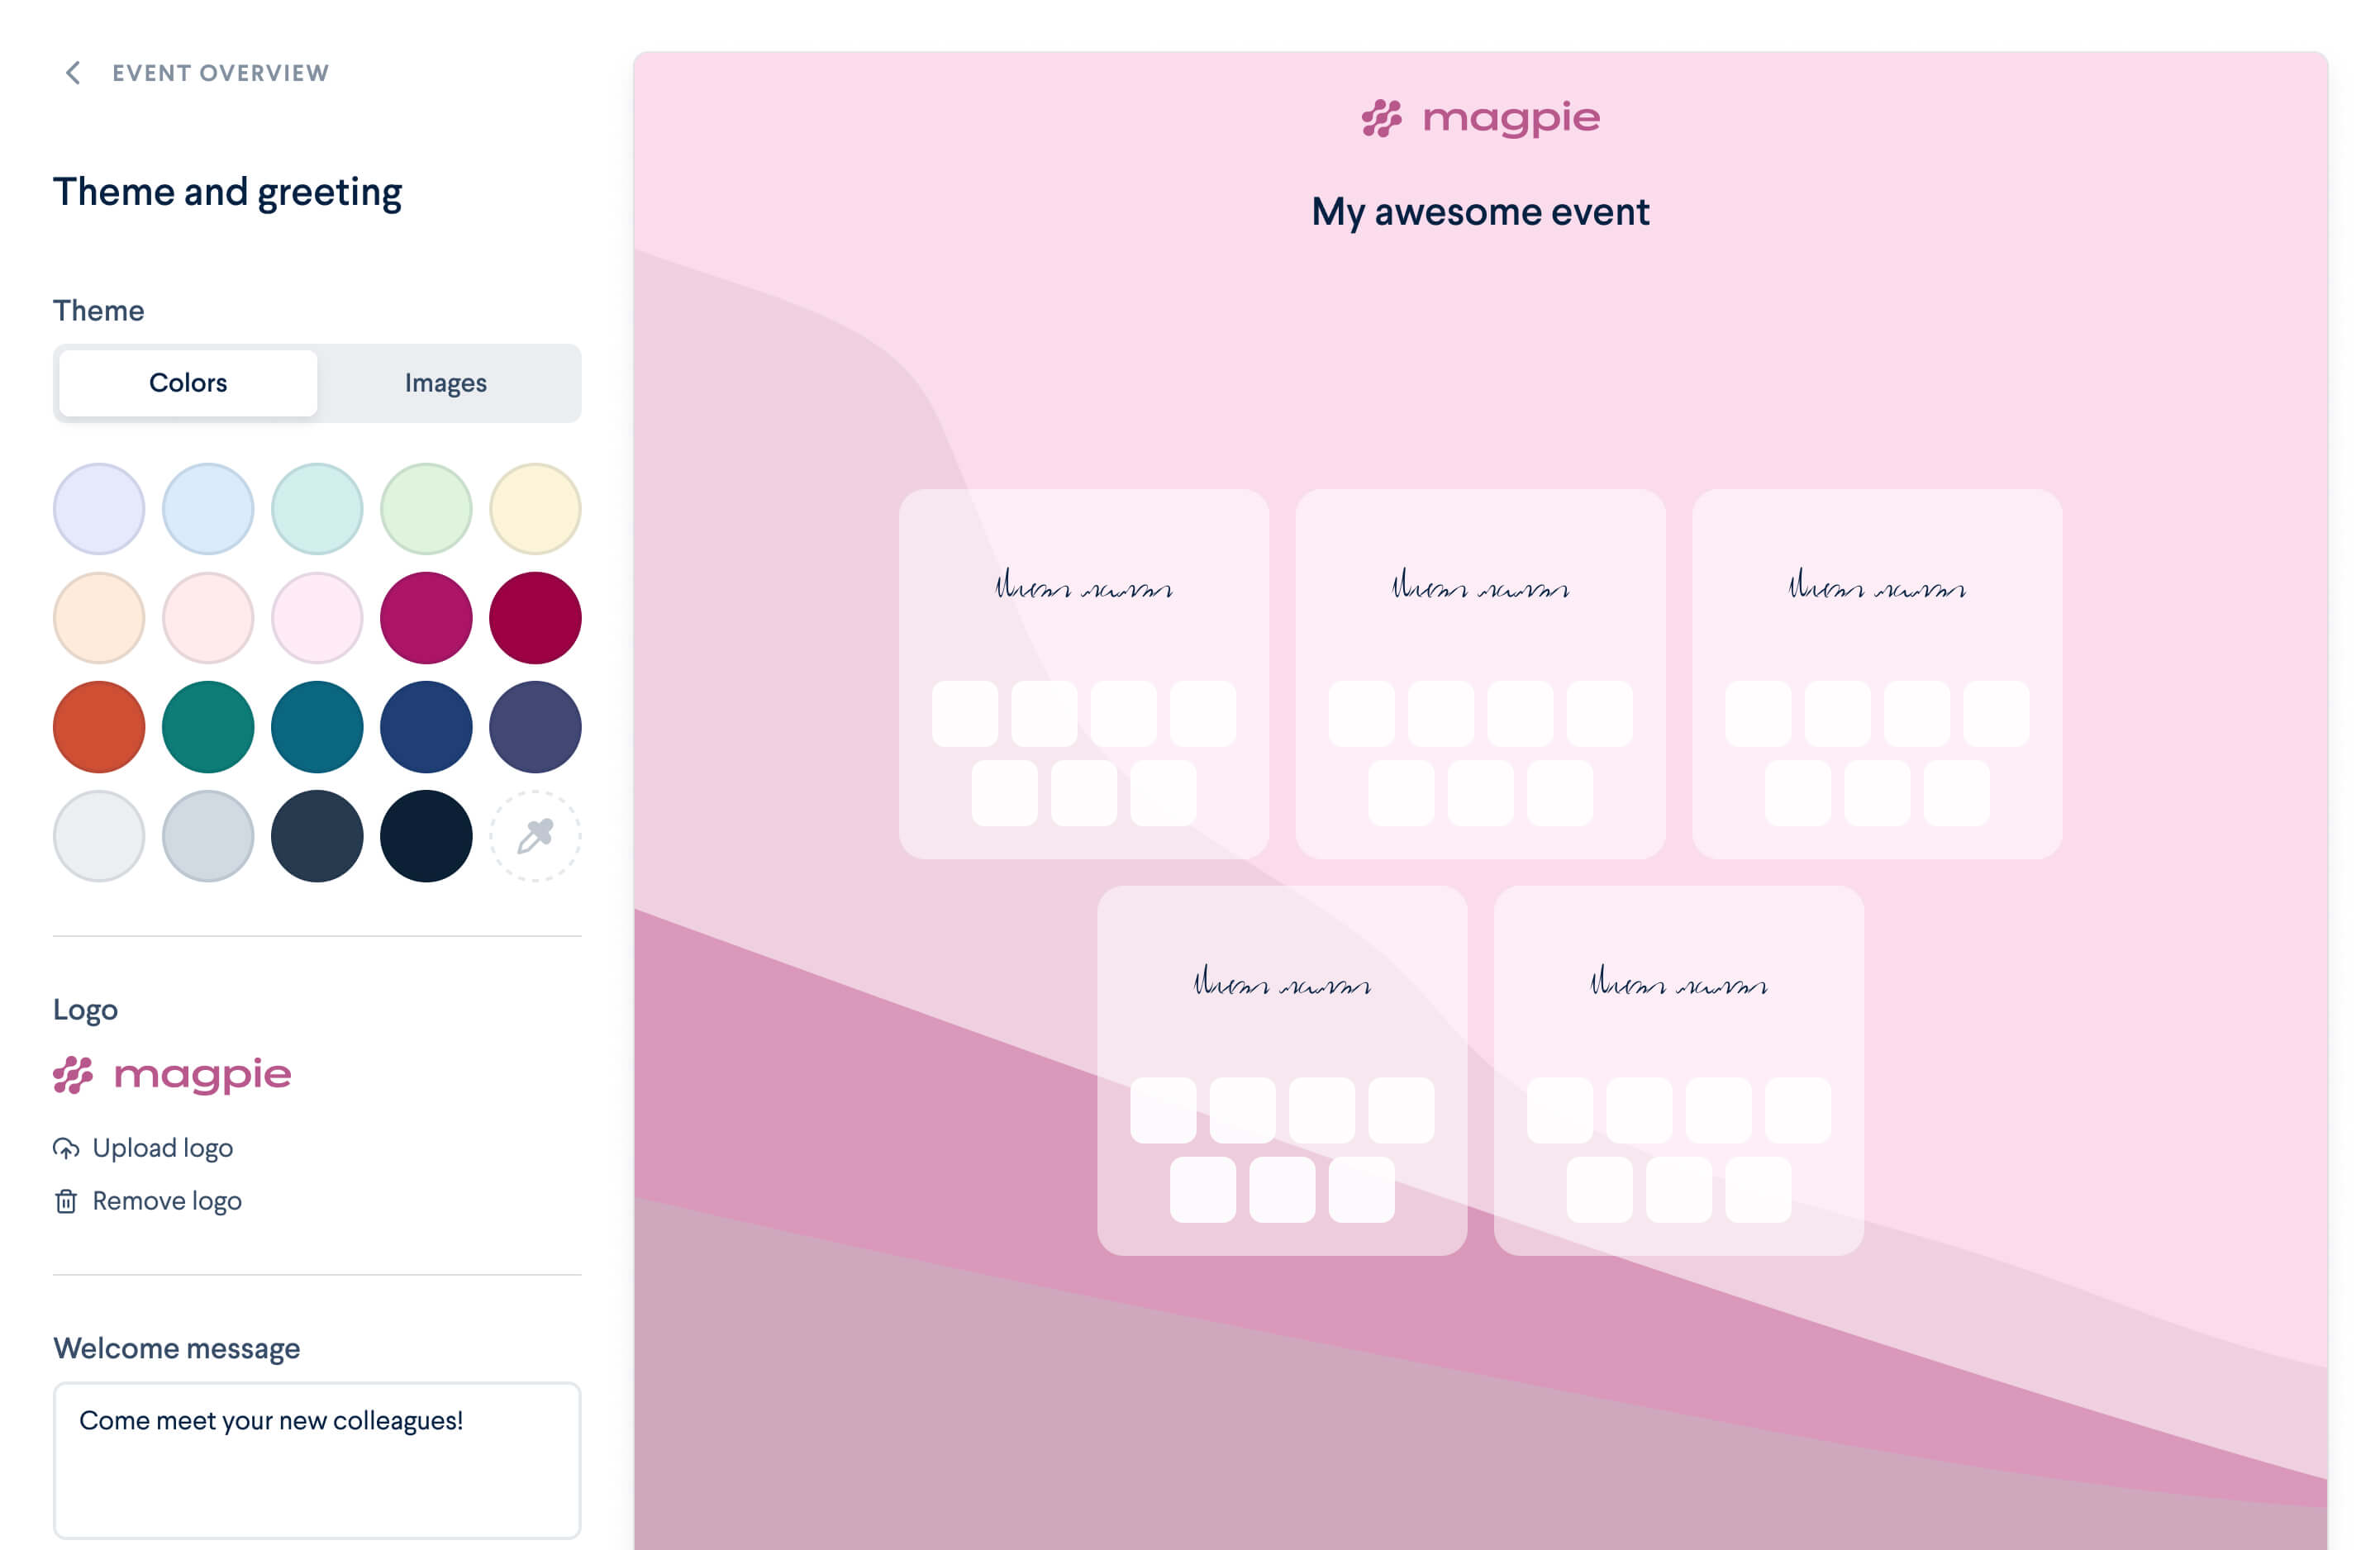 The backend of our platform with an editing panel on the left side where you can adjust background color, add a logo, and add a custom welcome message, on the right handside is a view of the event being customized, showing a lounge room with a pink multicolor background and tables